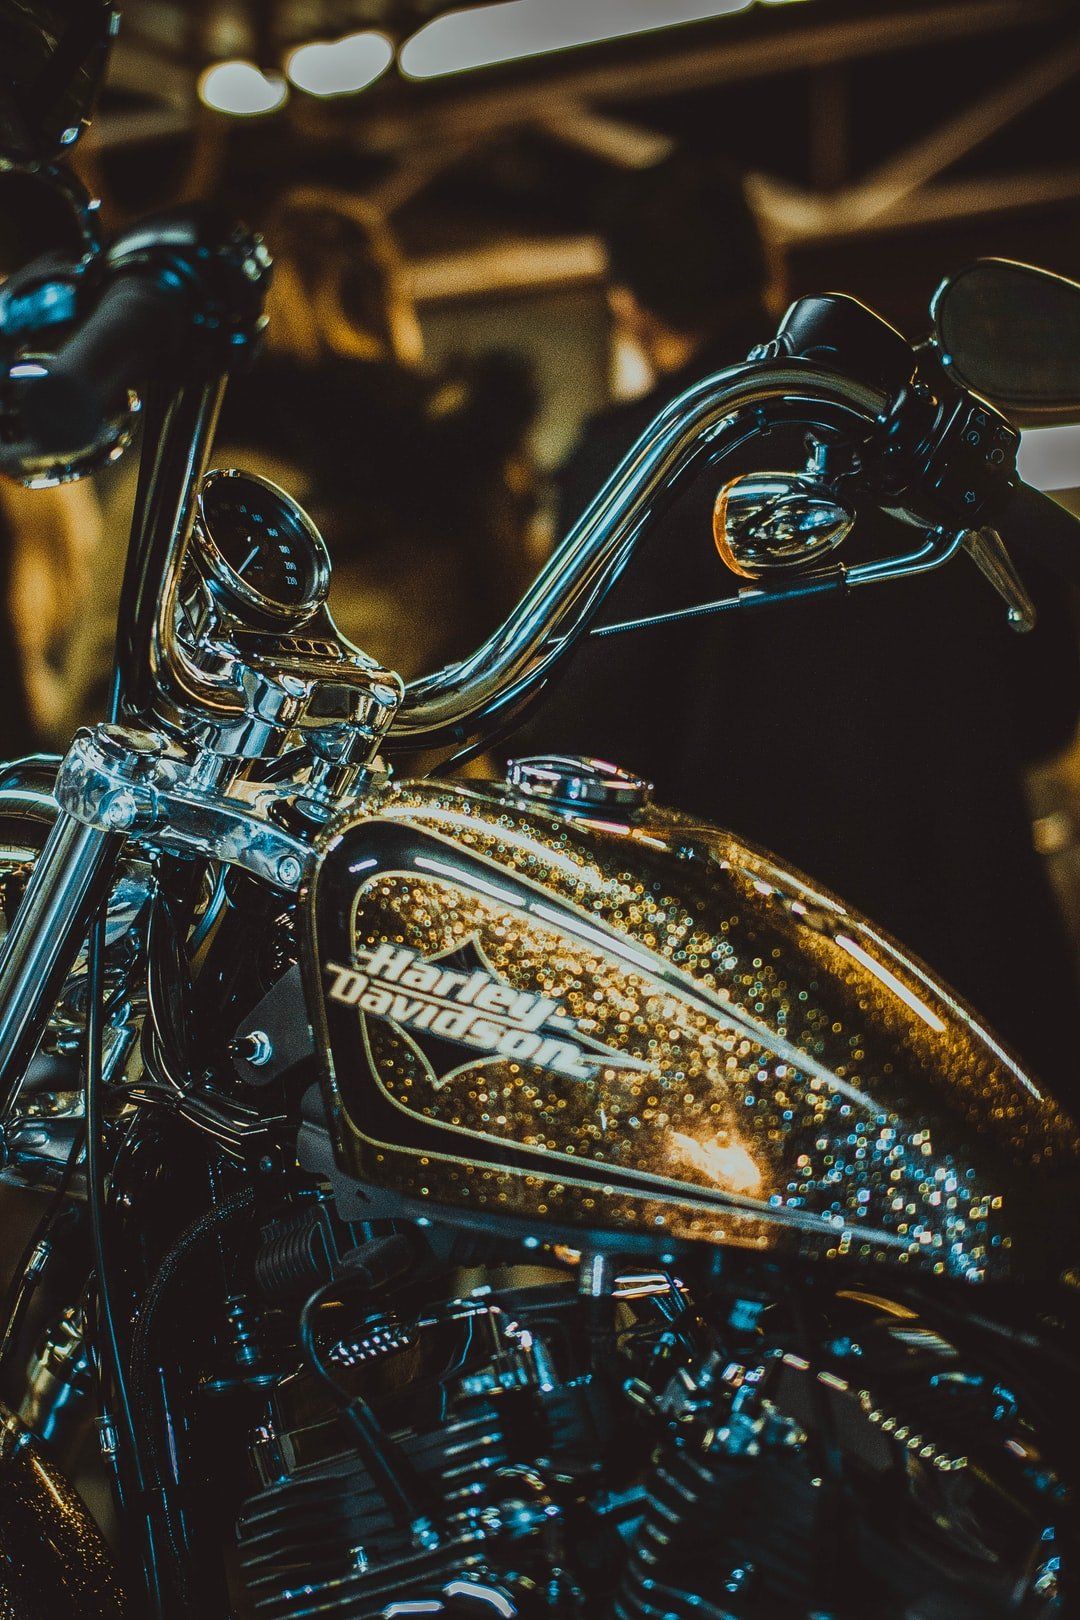 harley davidson in sparkly gold with high handle bars